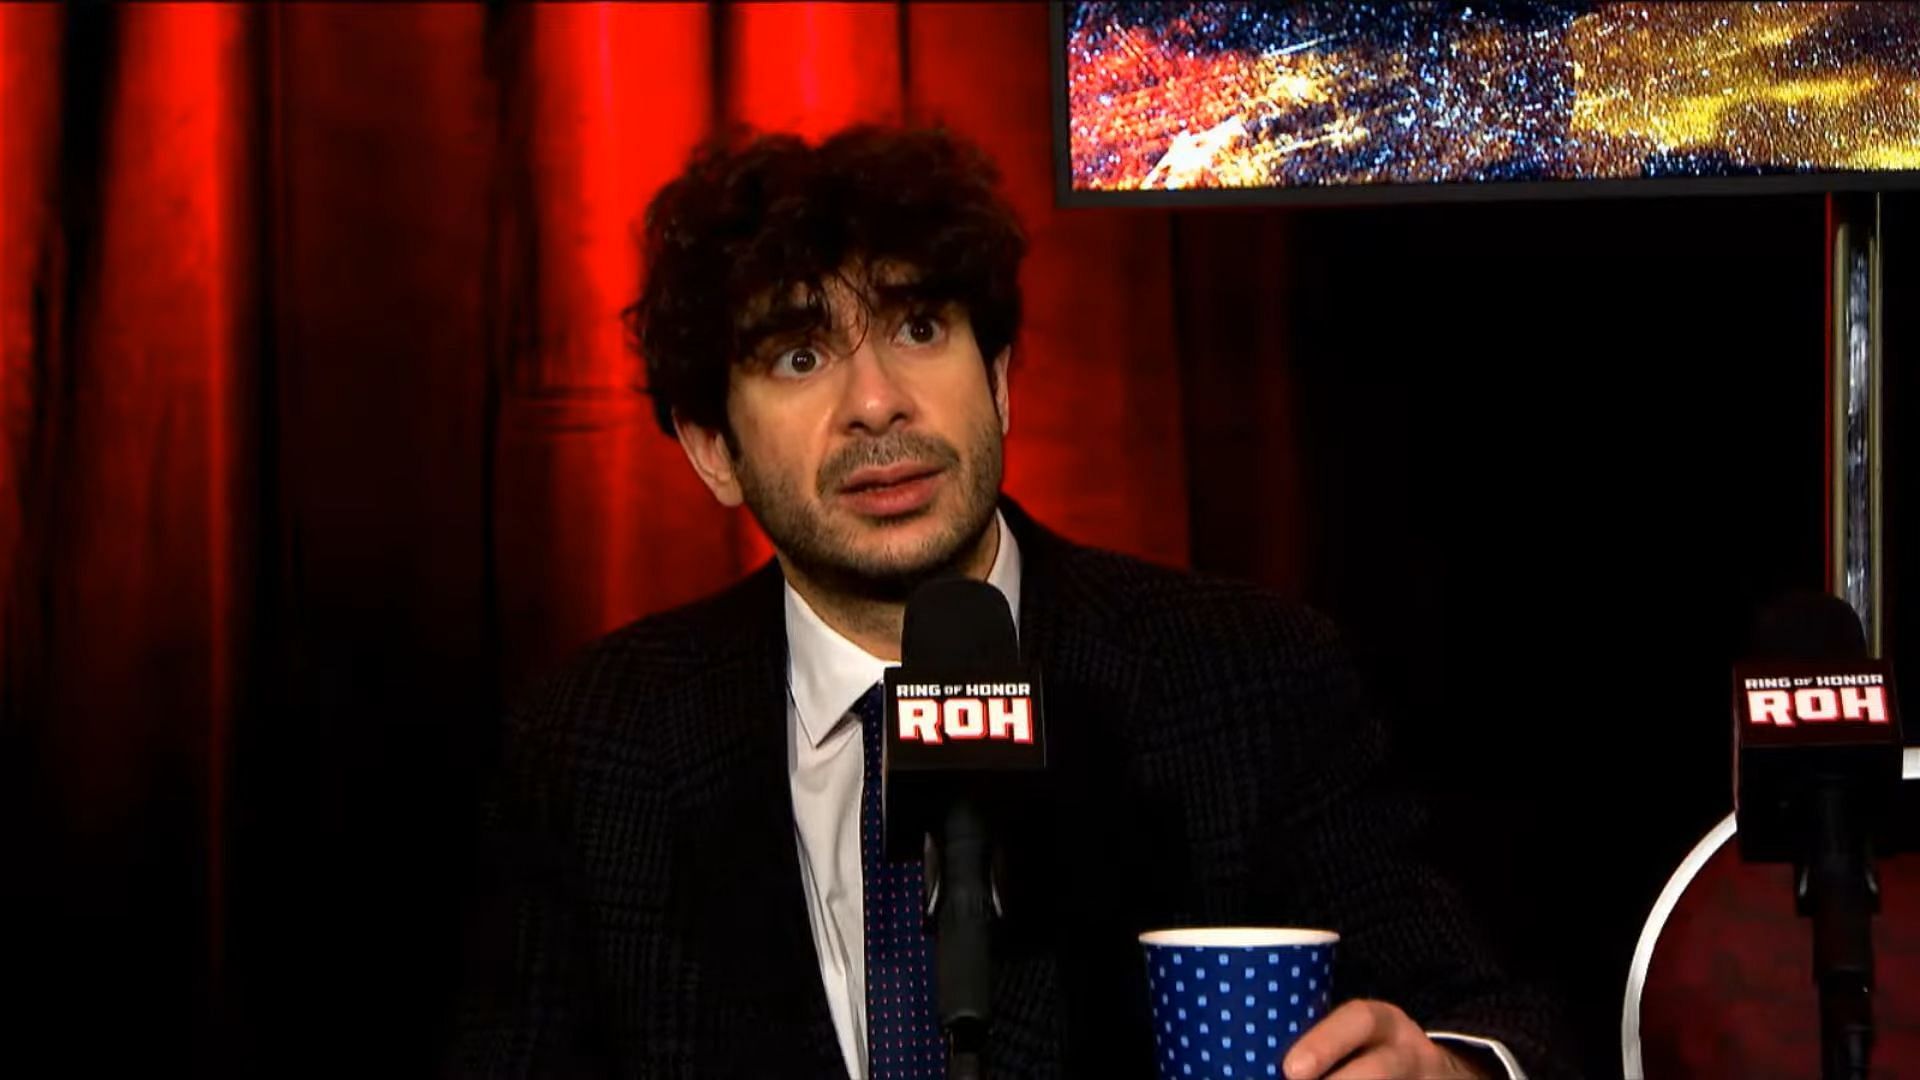 Tony Khan is the primary booker of both AEW and ROH